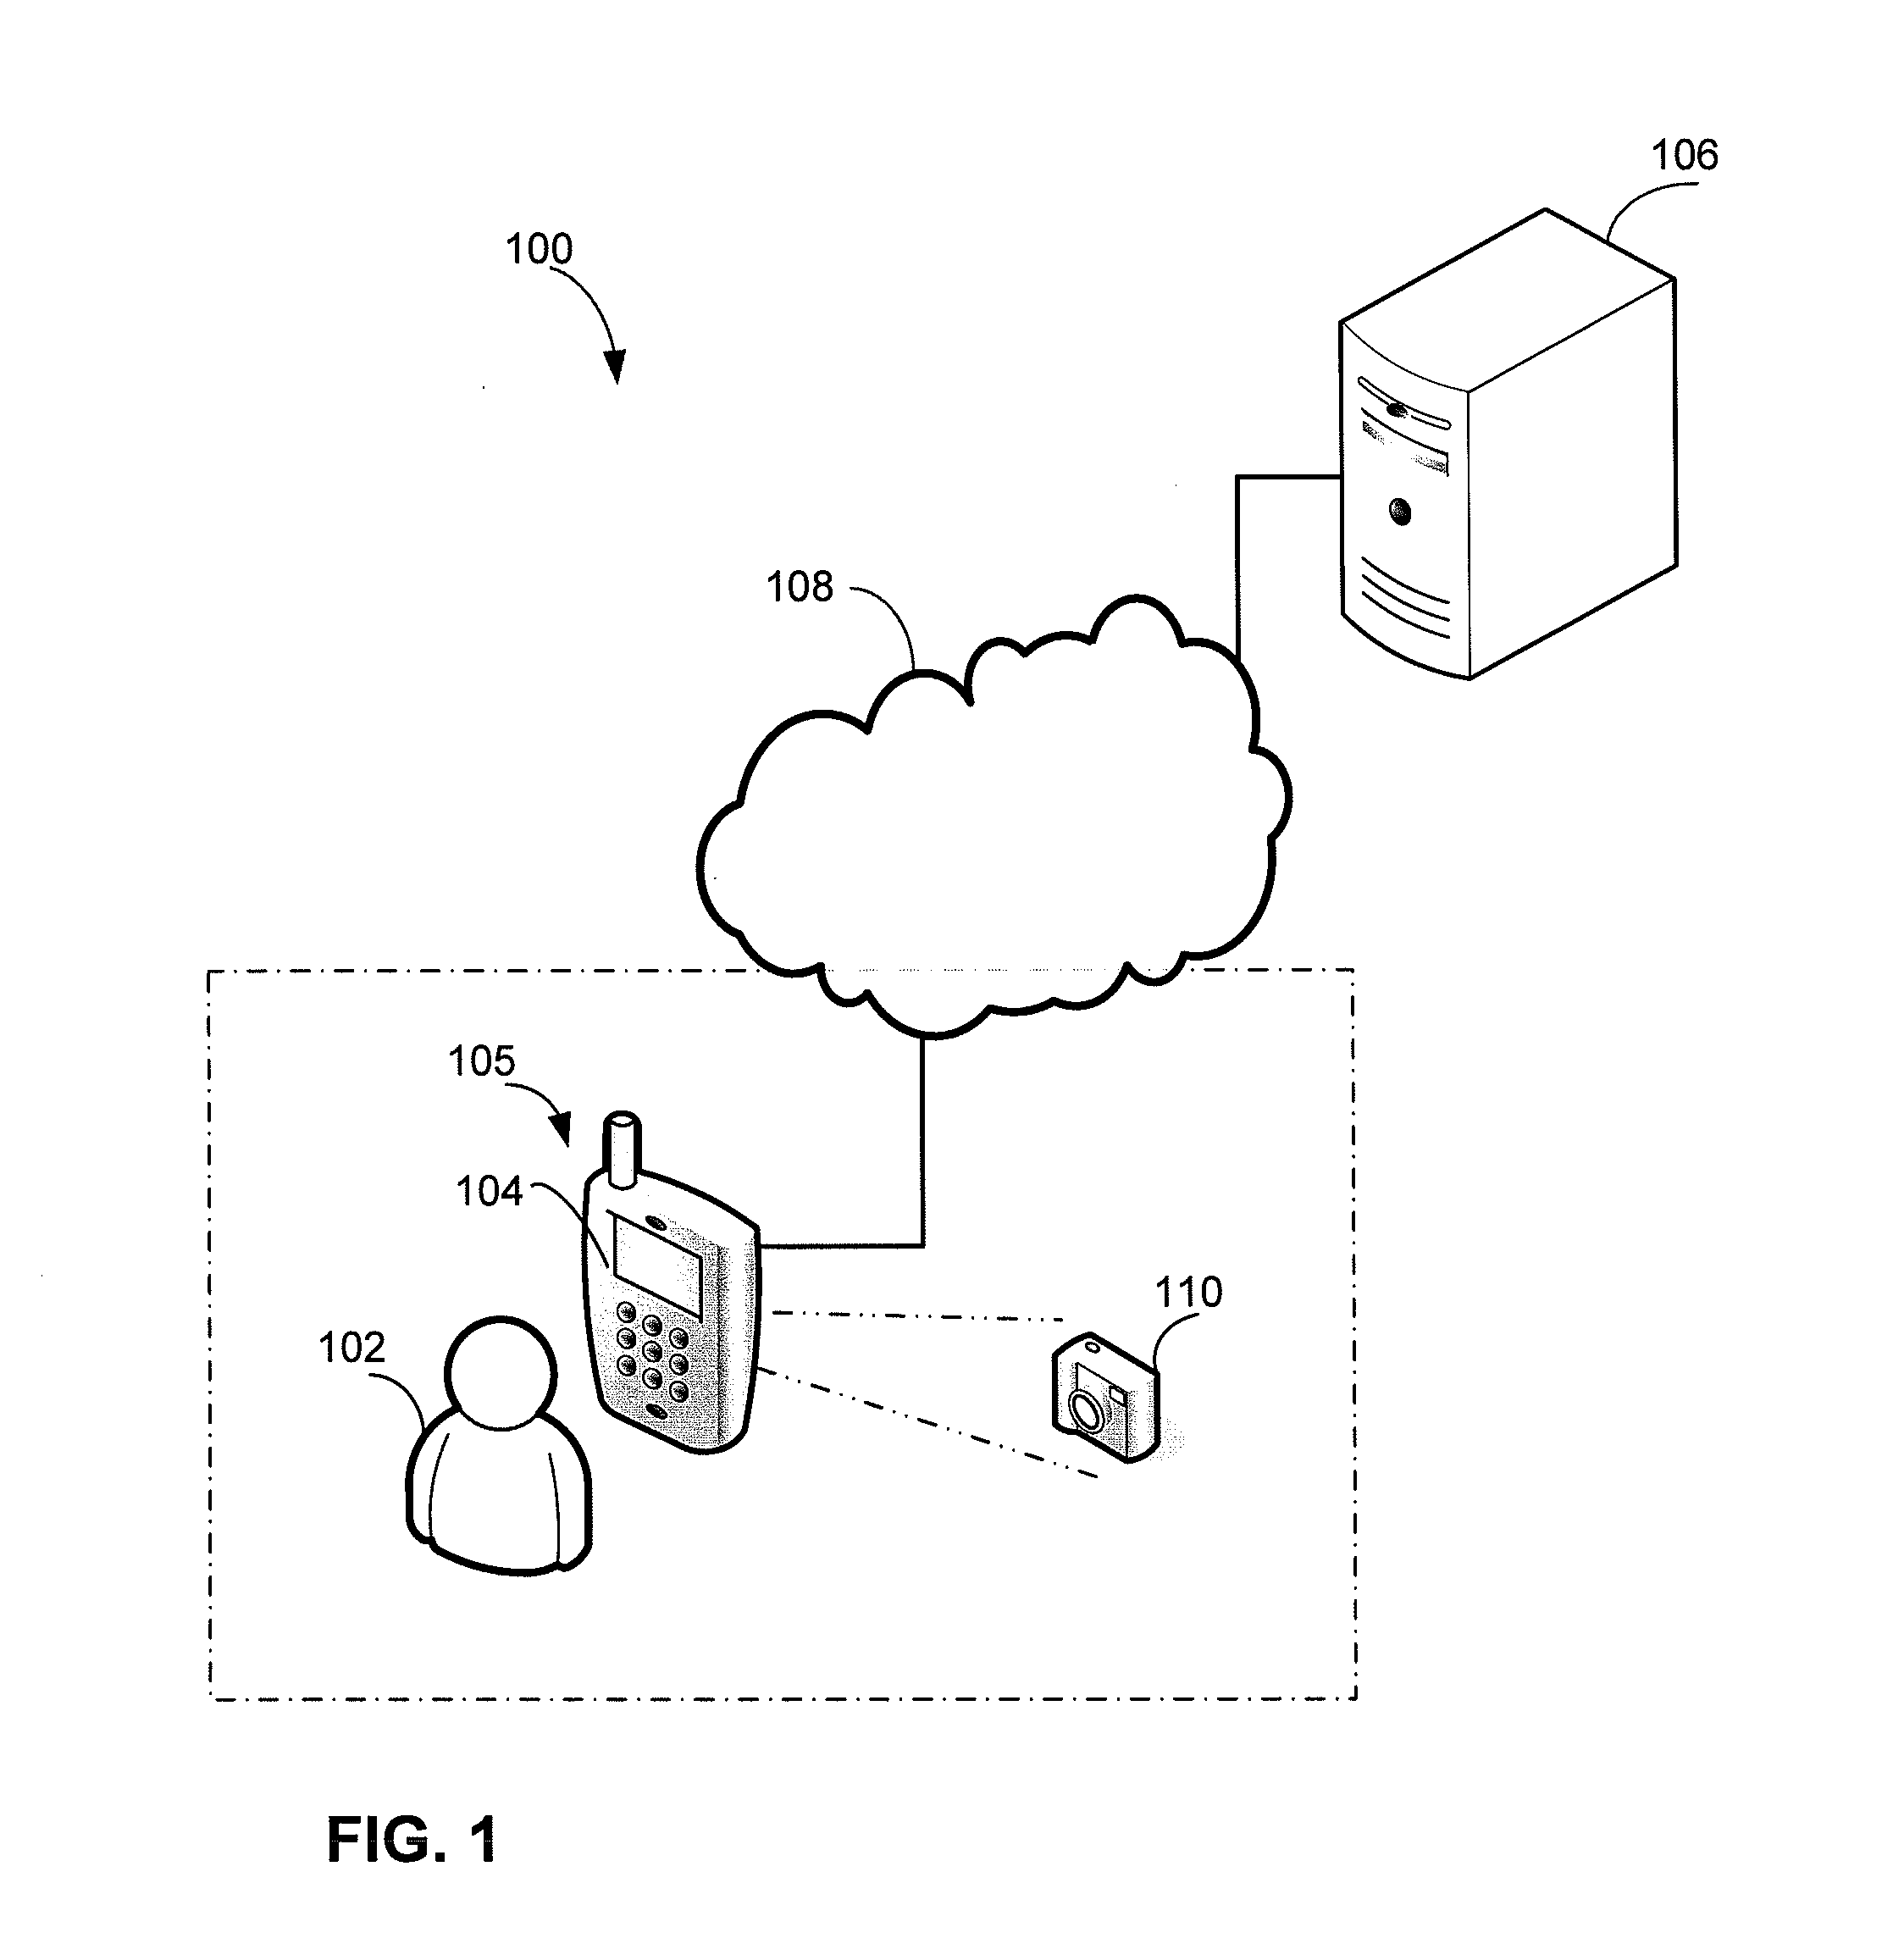 Assisted filtering of multi-dimensional data